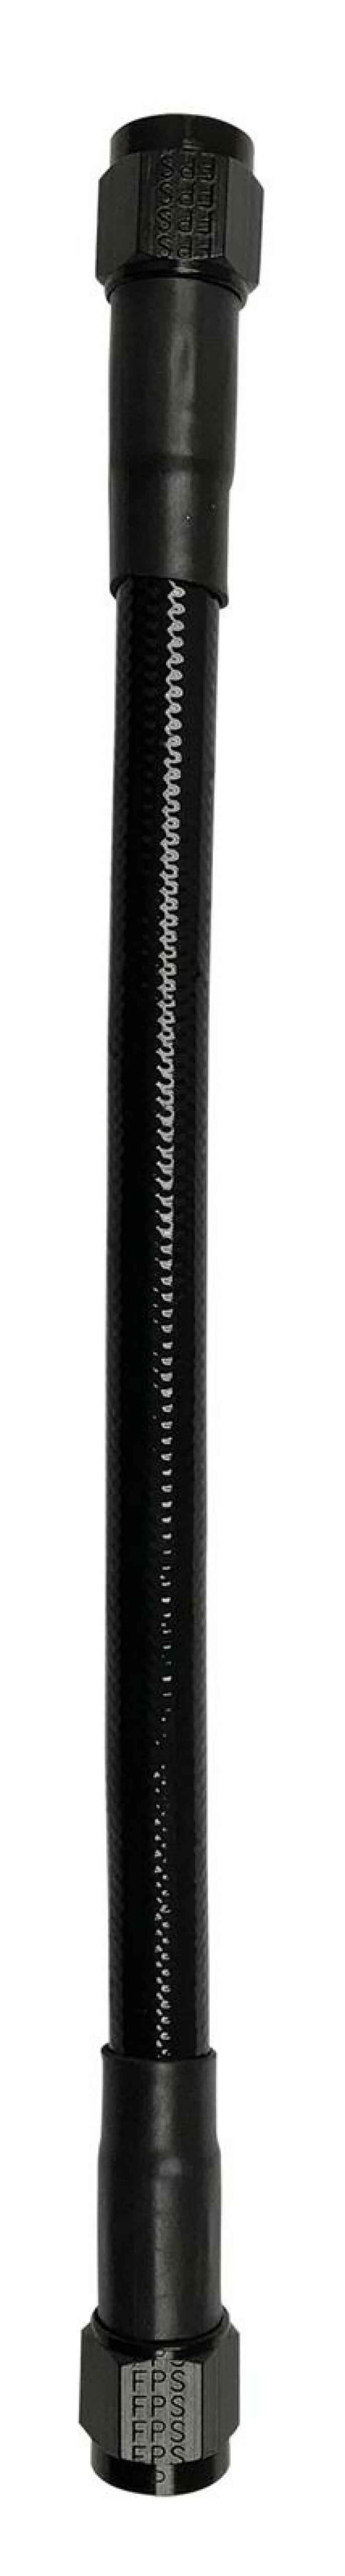 Fragola -6AN Ext Black PTFE Hose Assembly Straight x Straight 72in - 6026-1-1-72BL